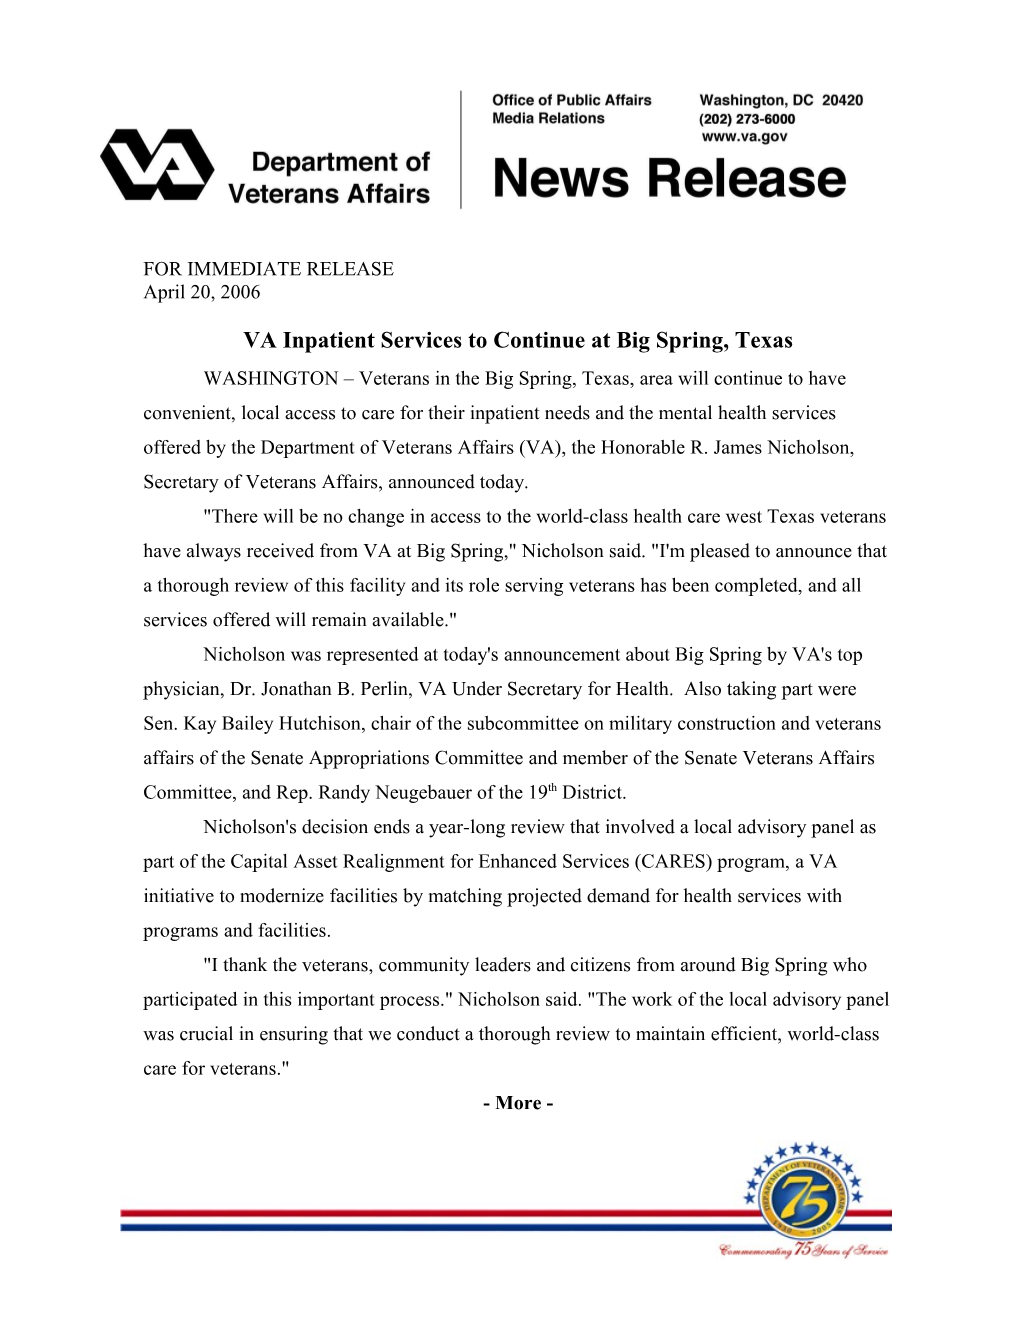 Vainpatient Services to Continue at Big Spring, Texas